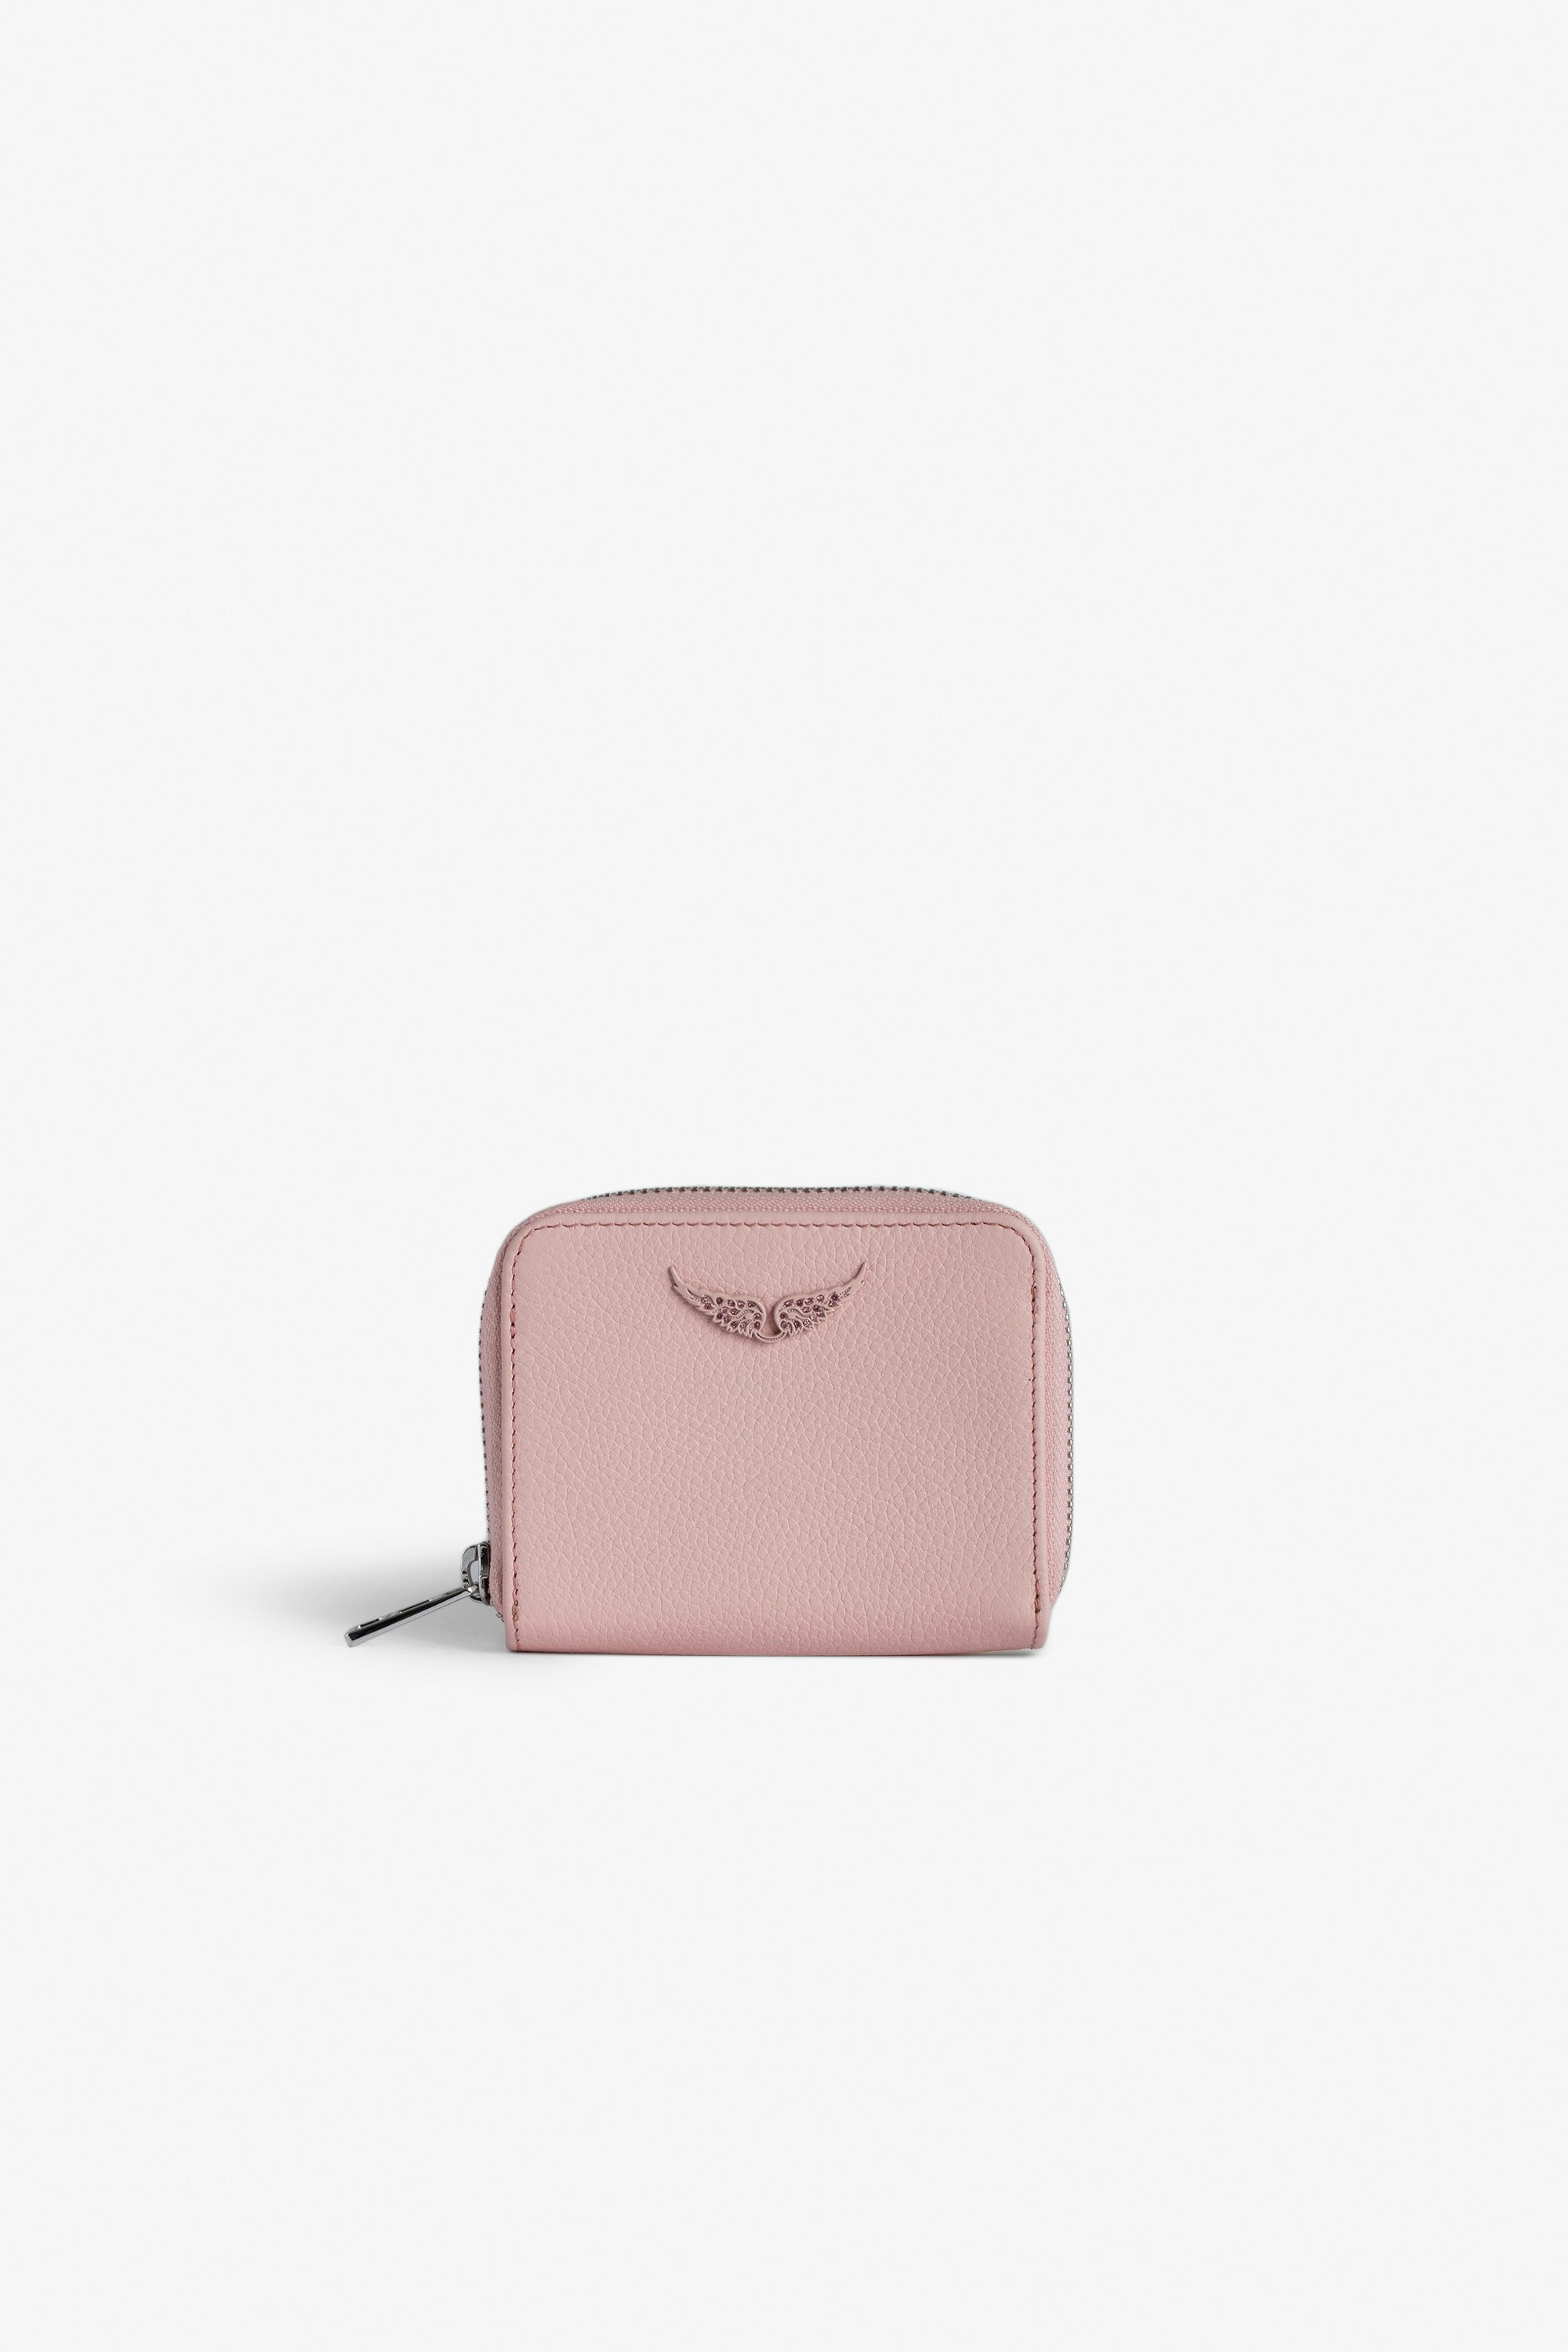 Mini ZV Coin 財布 Women’s pink grained leather wallet with diamanté wings charm.